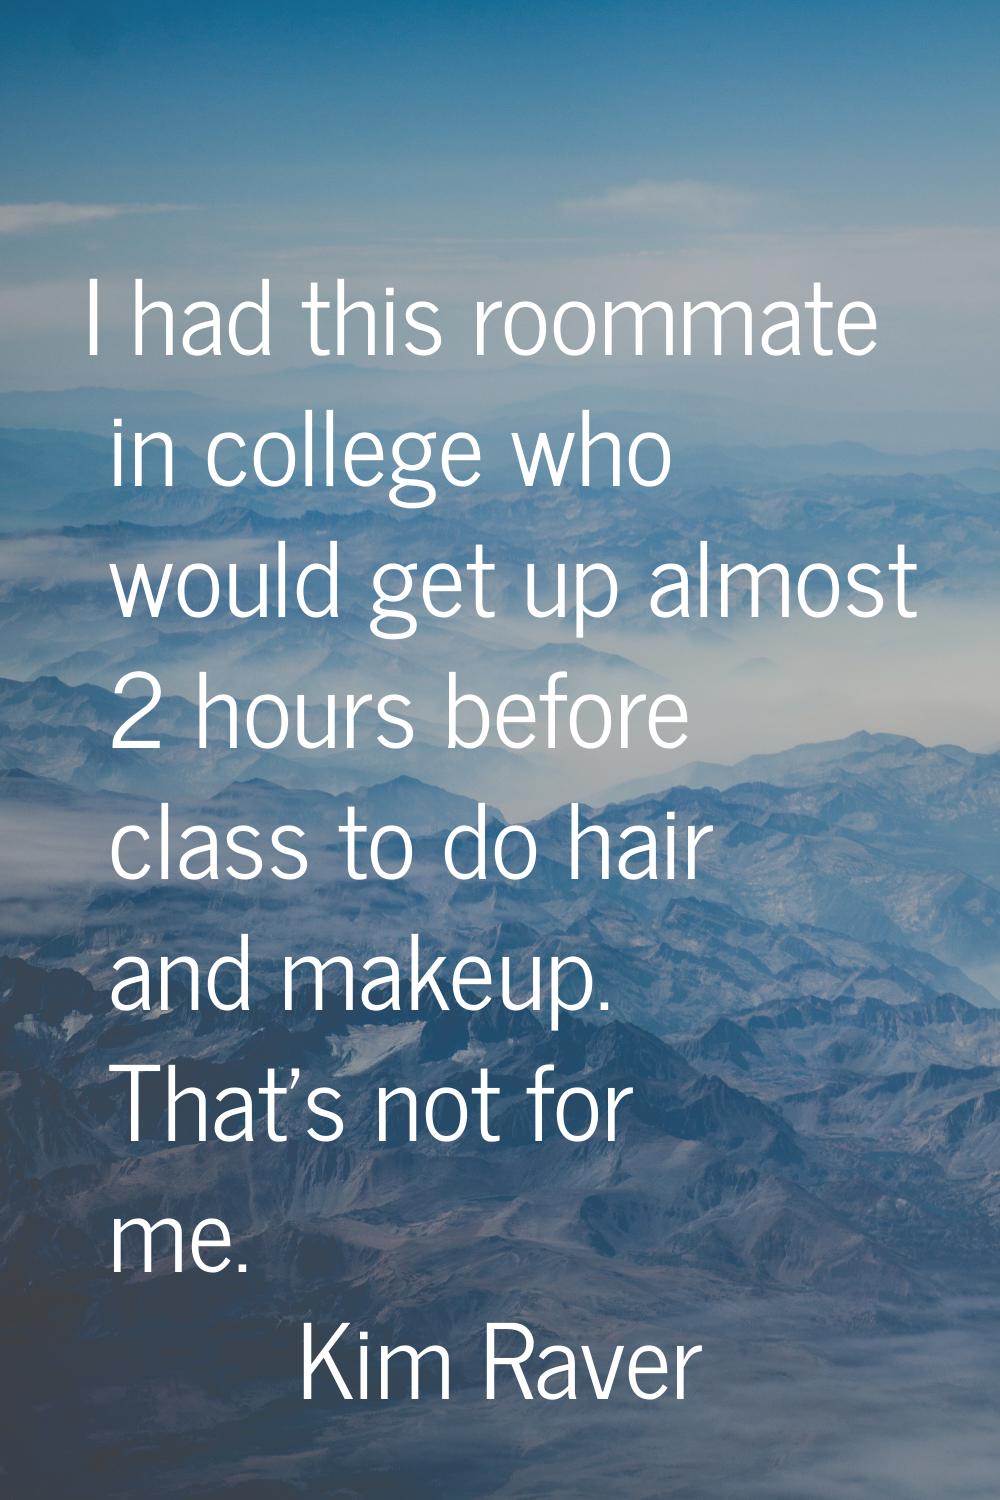 I had this roommate in college who would get up almost 2 hours before class to do hair and makeup. 